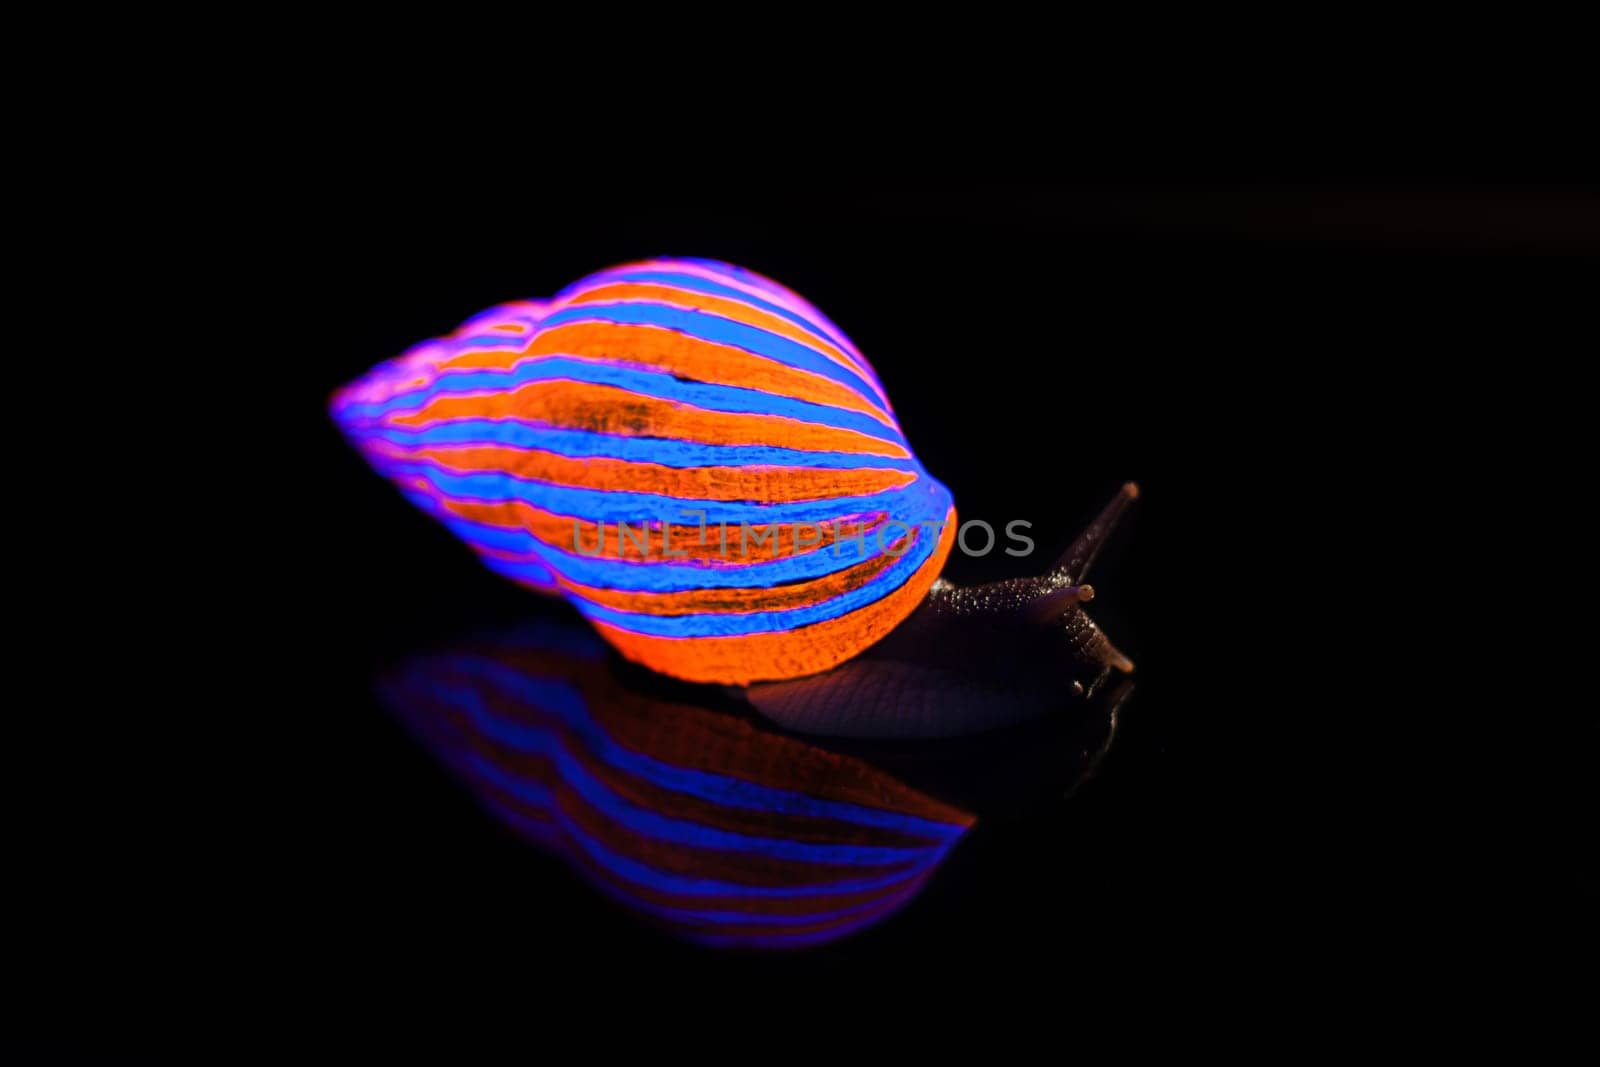 Snail with glowing striped shell, isolated on black